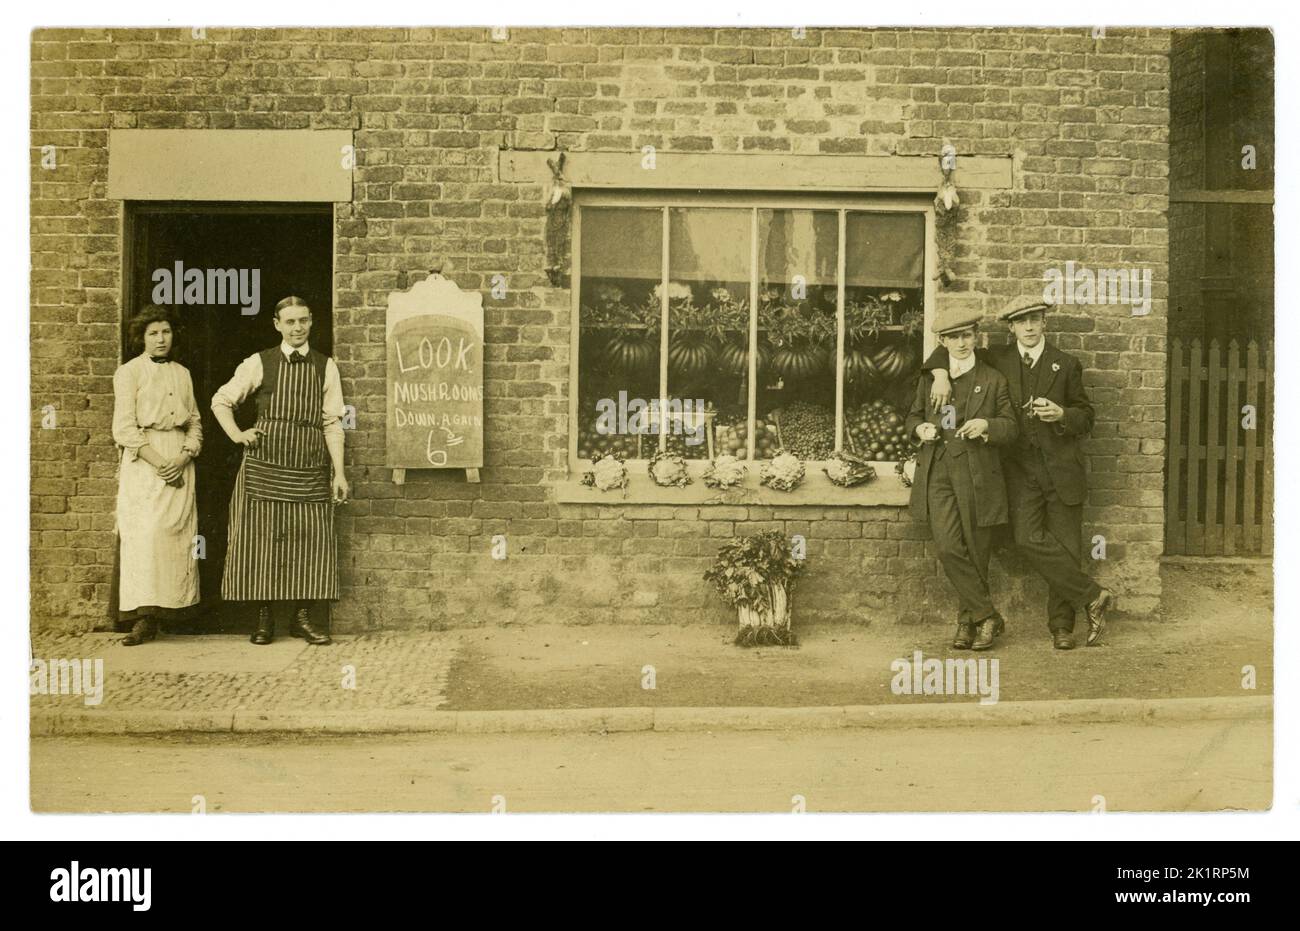 Original very clear early 1900's Edwardian era postcard of small grocery shop, general store, independent, selling vegetables - cauliflowers, celery, fruit - bananas - displayed in the shop window. Display board advertising mushrooms reduced in price. A rabbit hangs from each side of the window. The husband and wife, couple, proprietors (the man wearing a stripy apron) stand outside their store with 2 fashionable lads in suits and wearing flat caps, customers, cheeky characters, friends, friendships, gay maybe . Circa 1912. Village in the U.K. Stock Photo